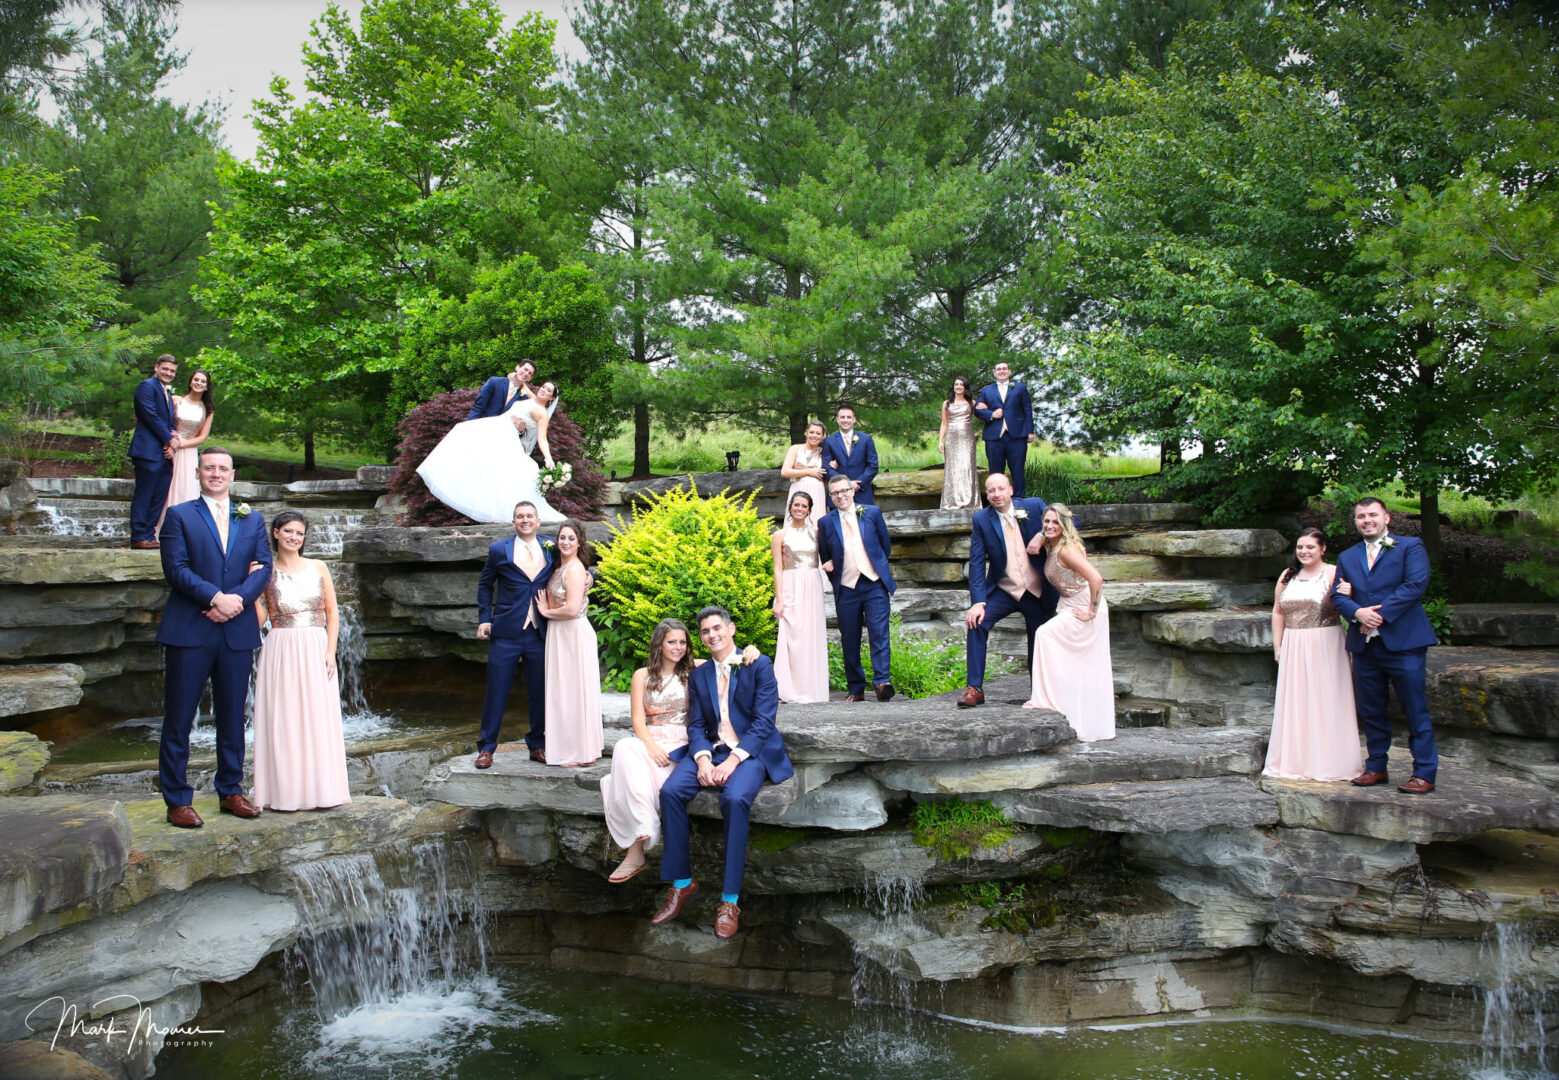 Bridal party posing on a waterfall